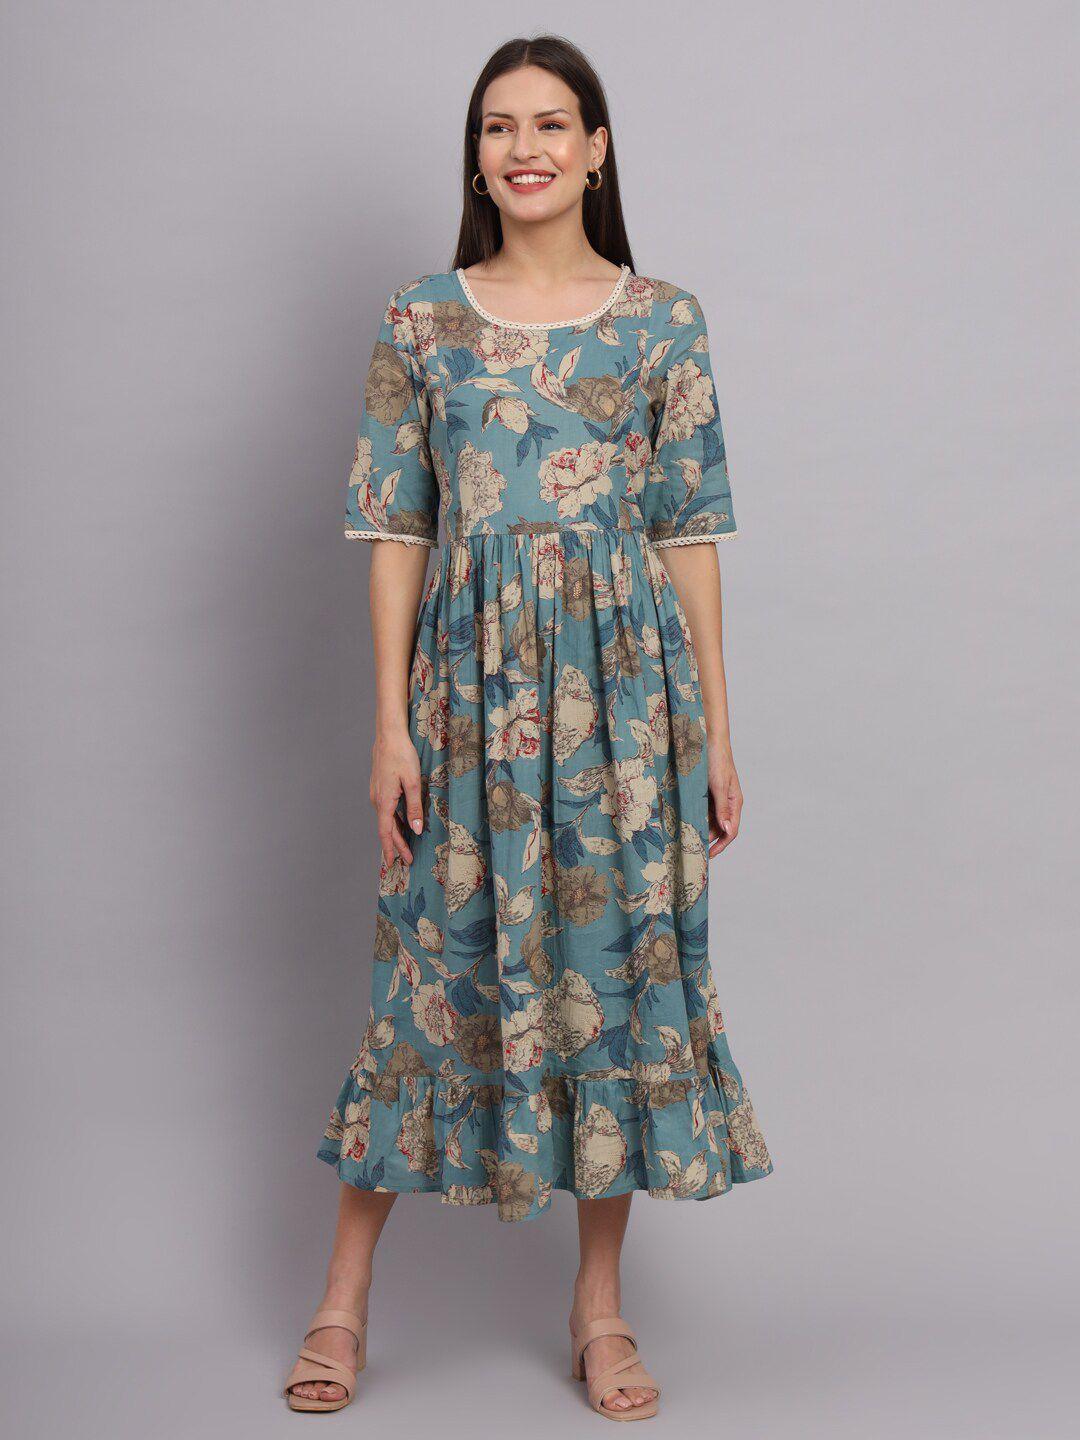 deckedup-round-neck-floral-printed-gathered-lace-up-detail-cotton-a-line-midi-dress